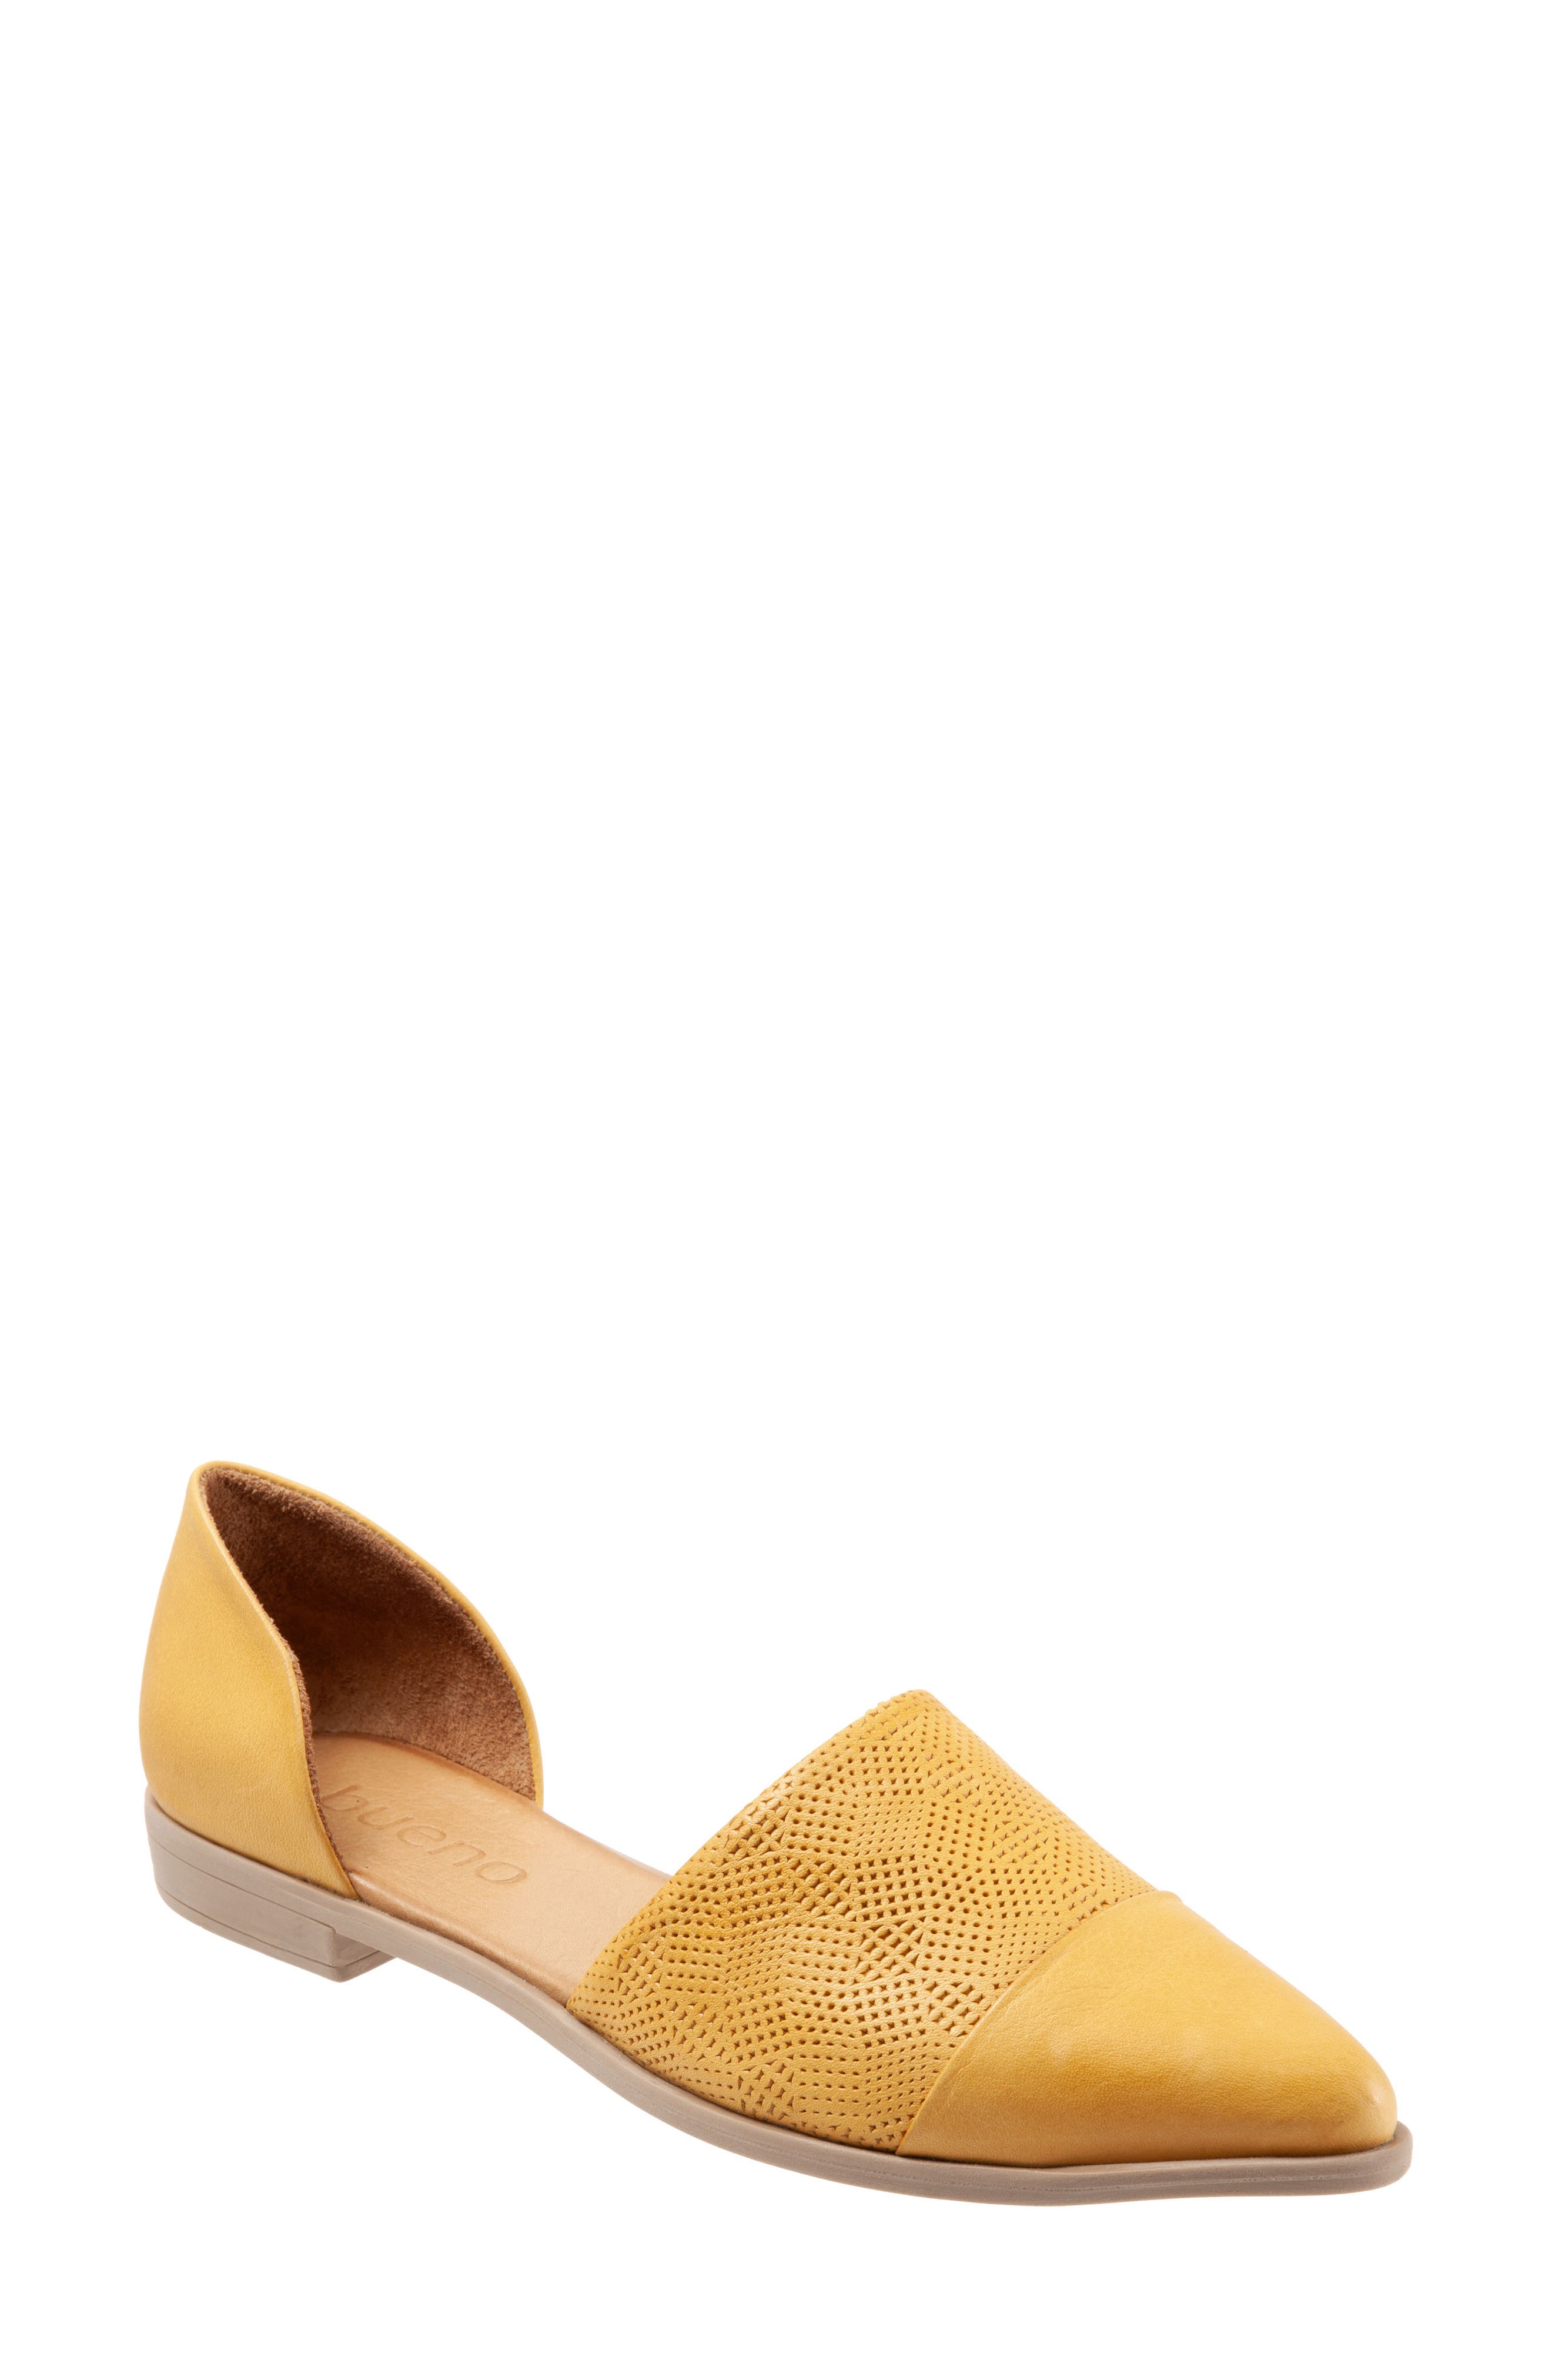 Bueno Bella d'Orsay Flat in Mustard Leather